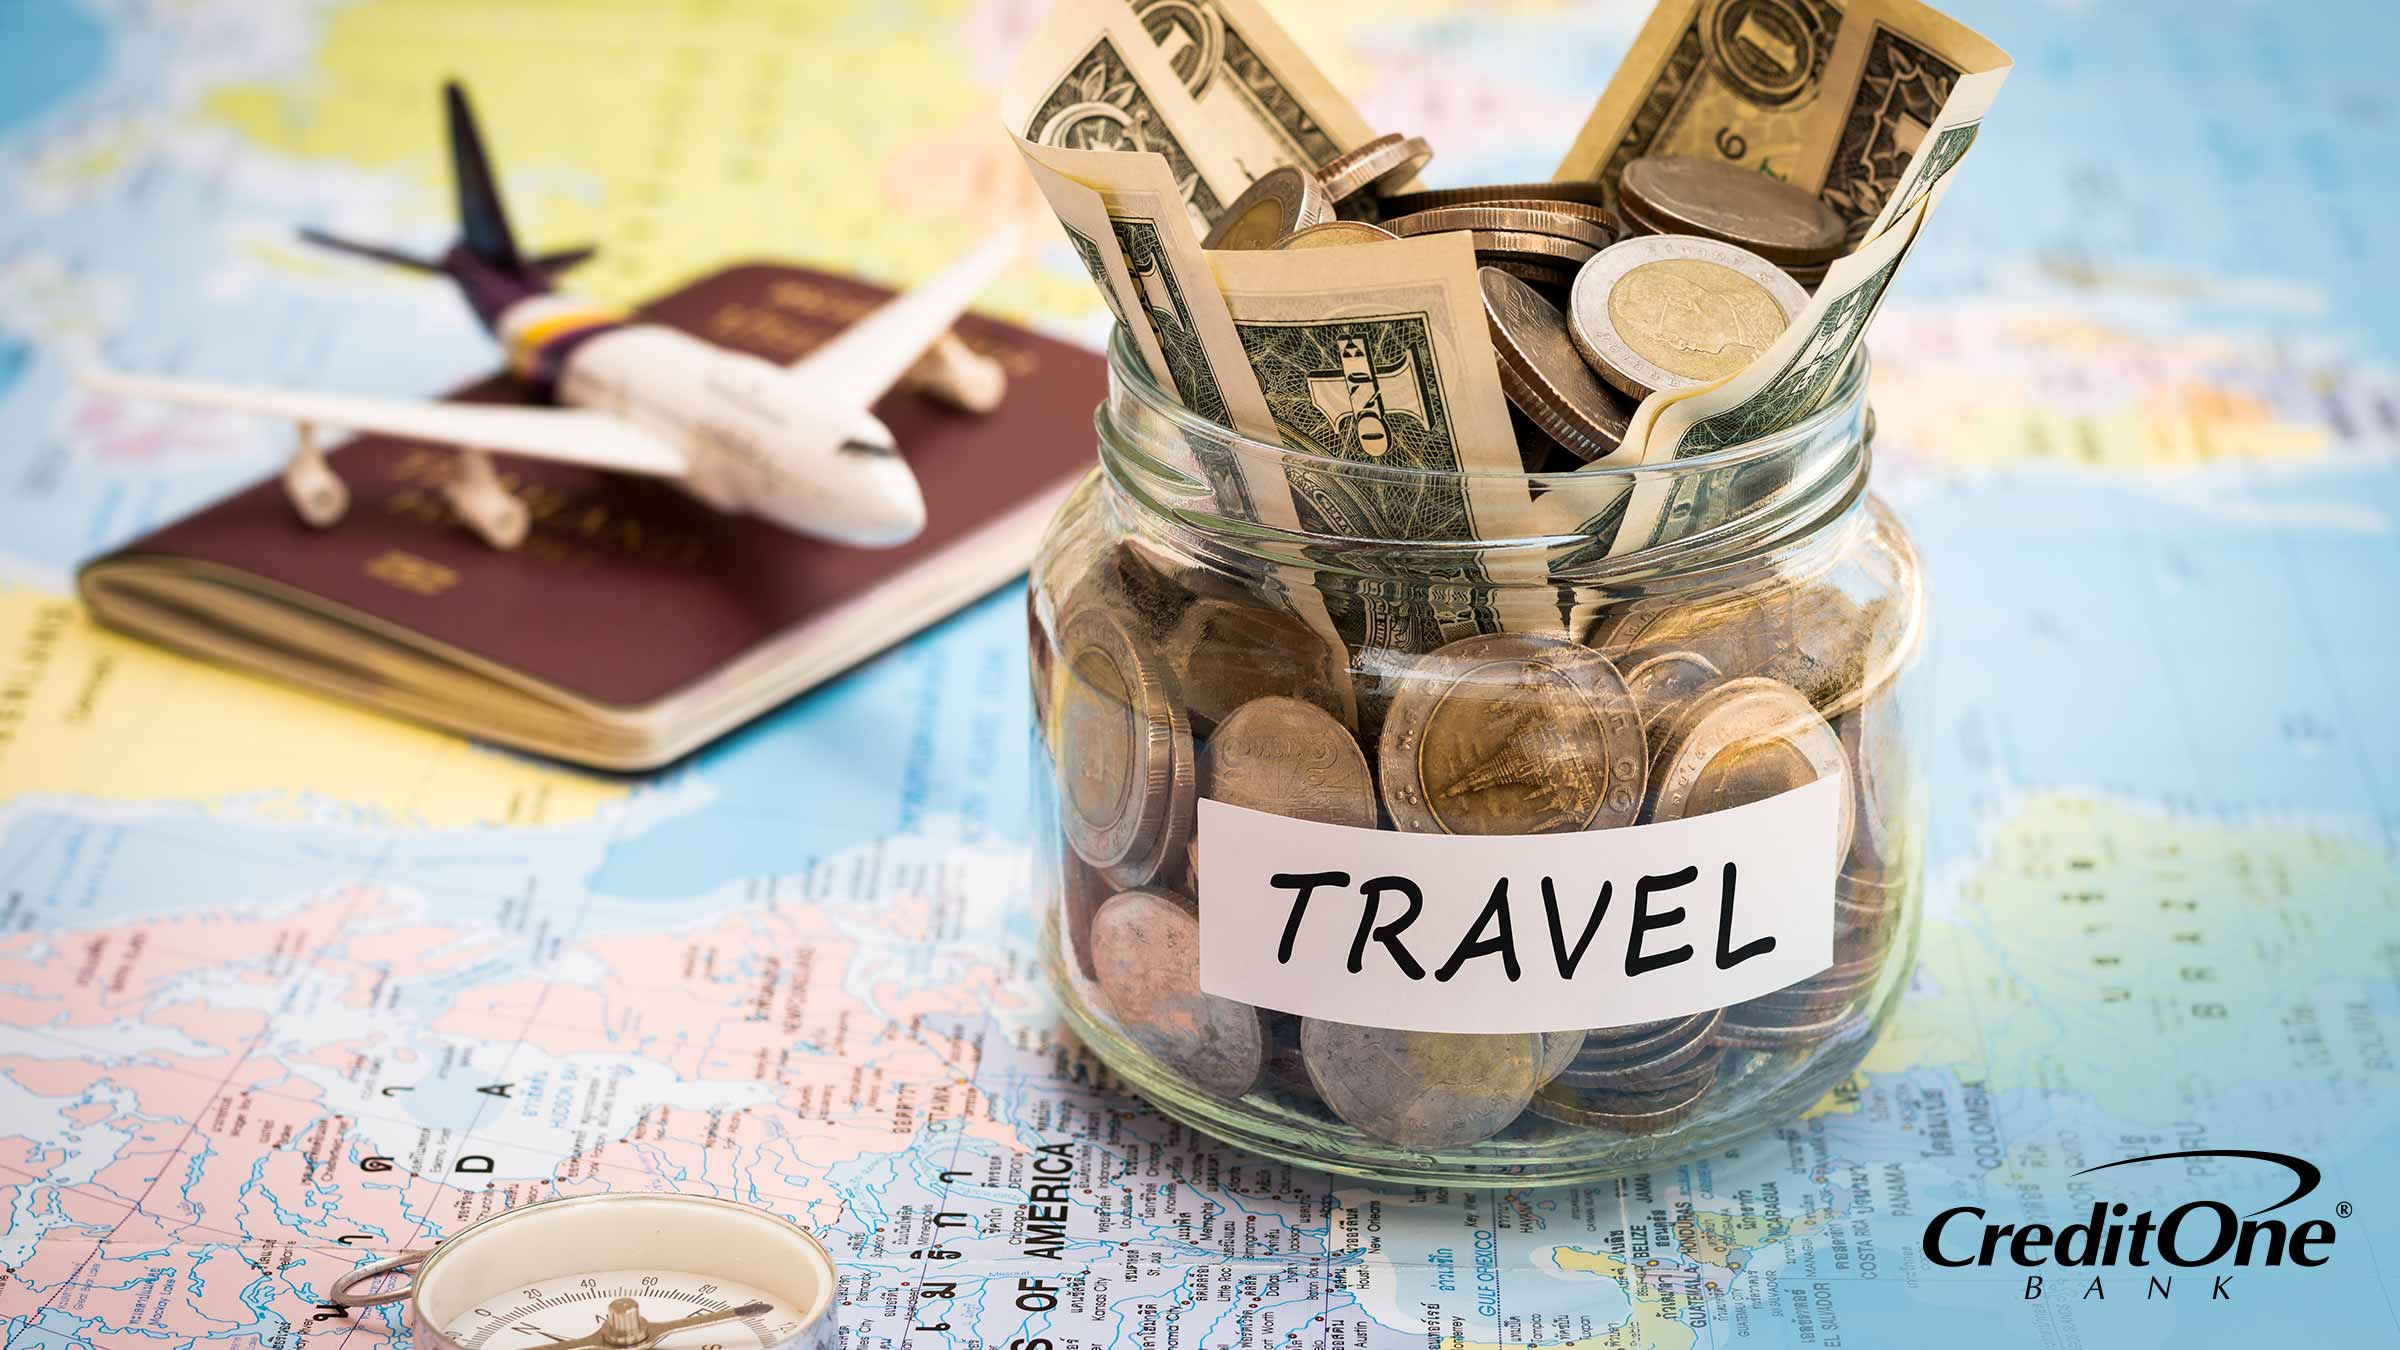 A vacation fund jar to save for annual travel sits on a map with passport and compass